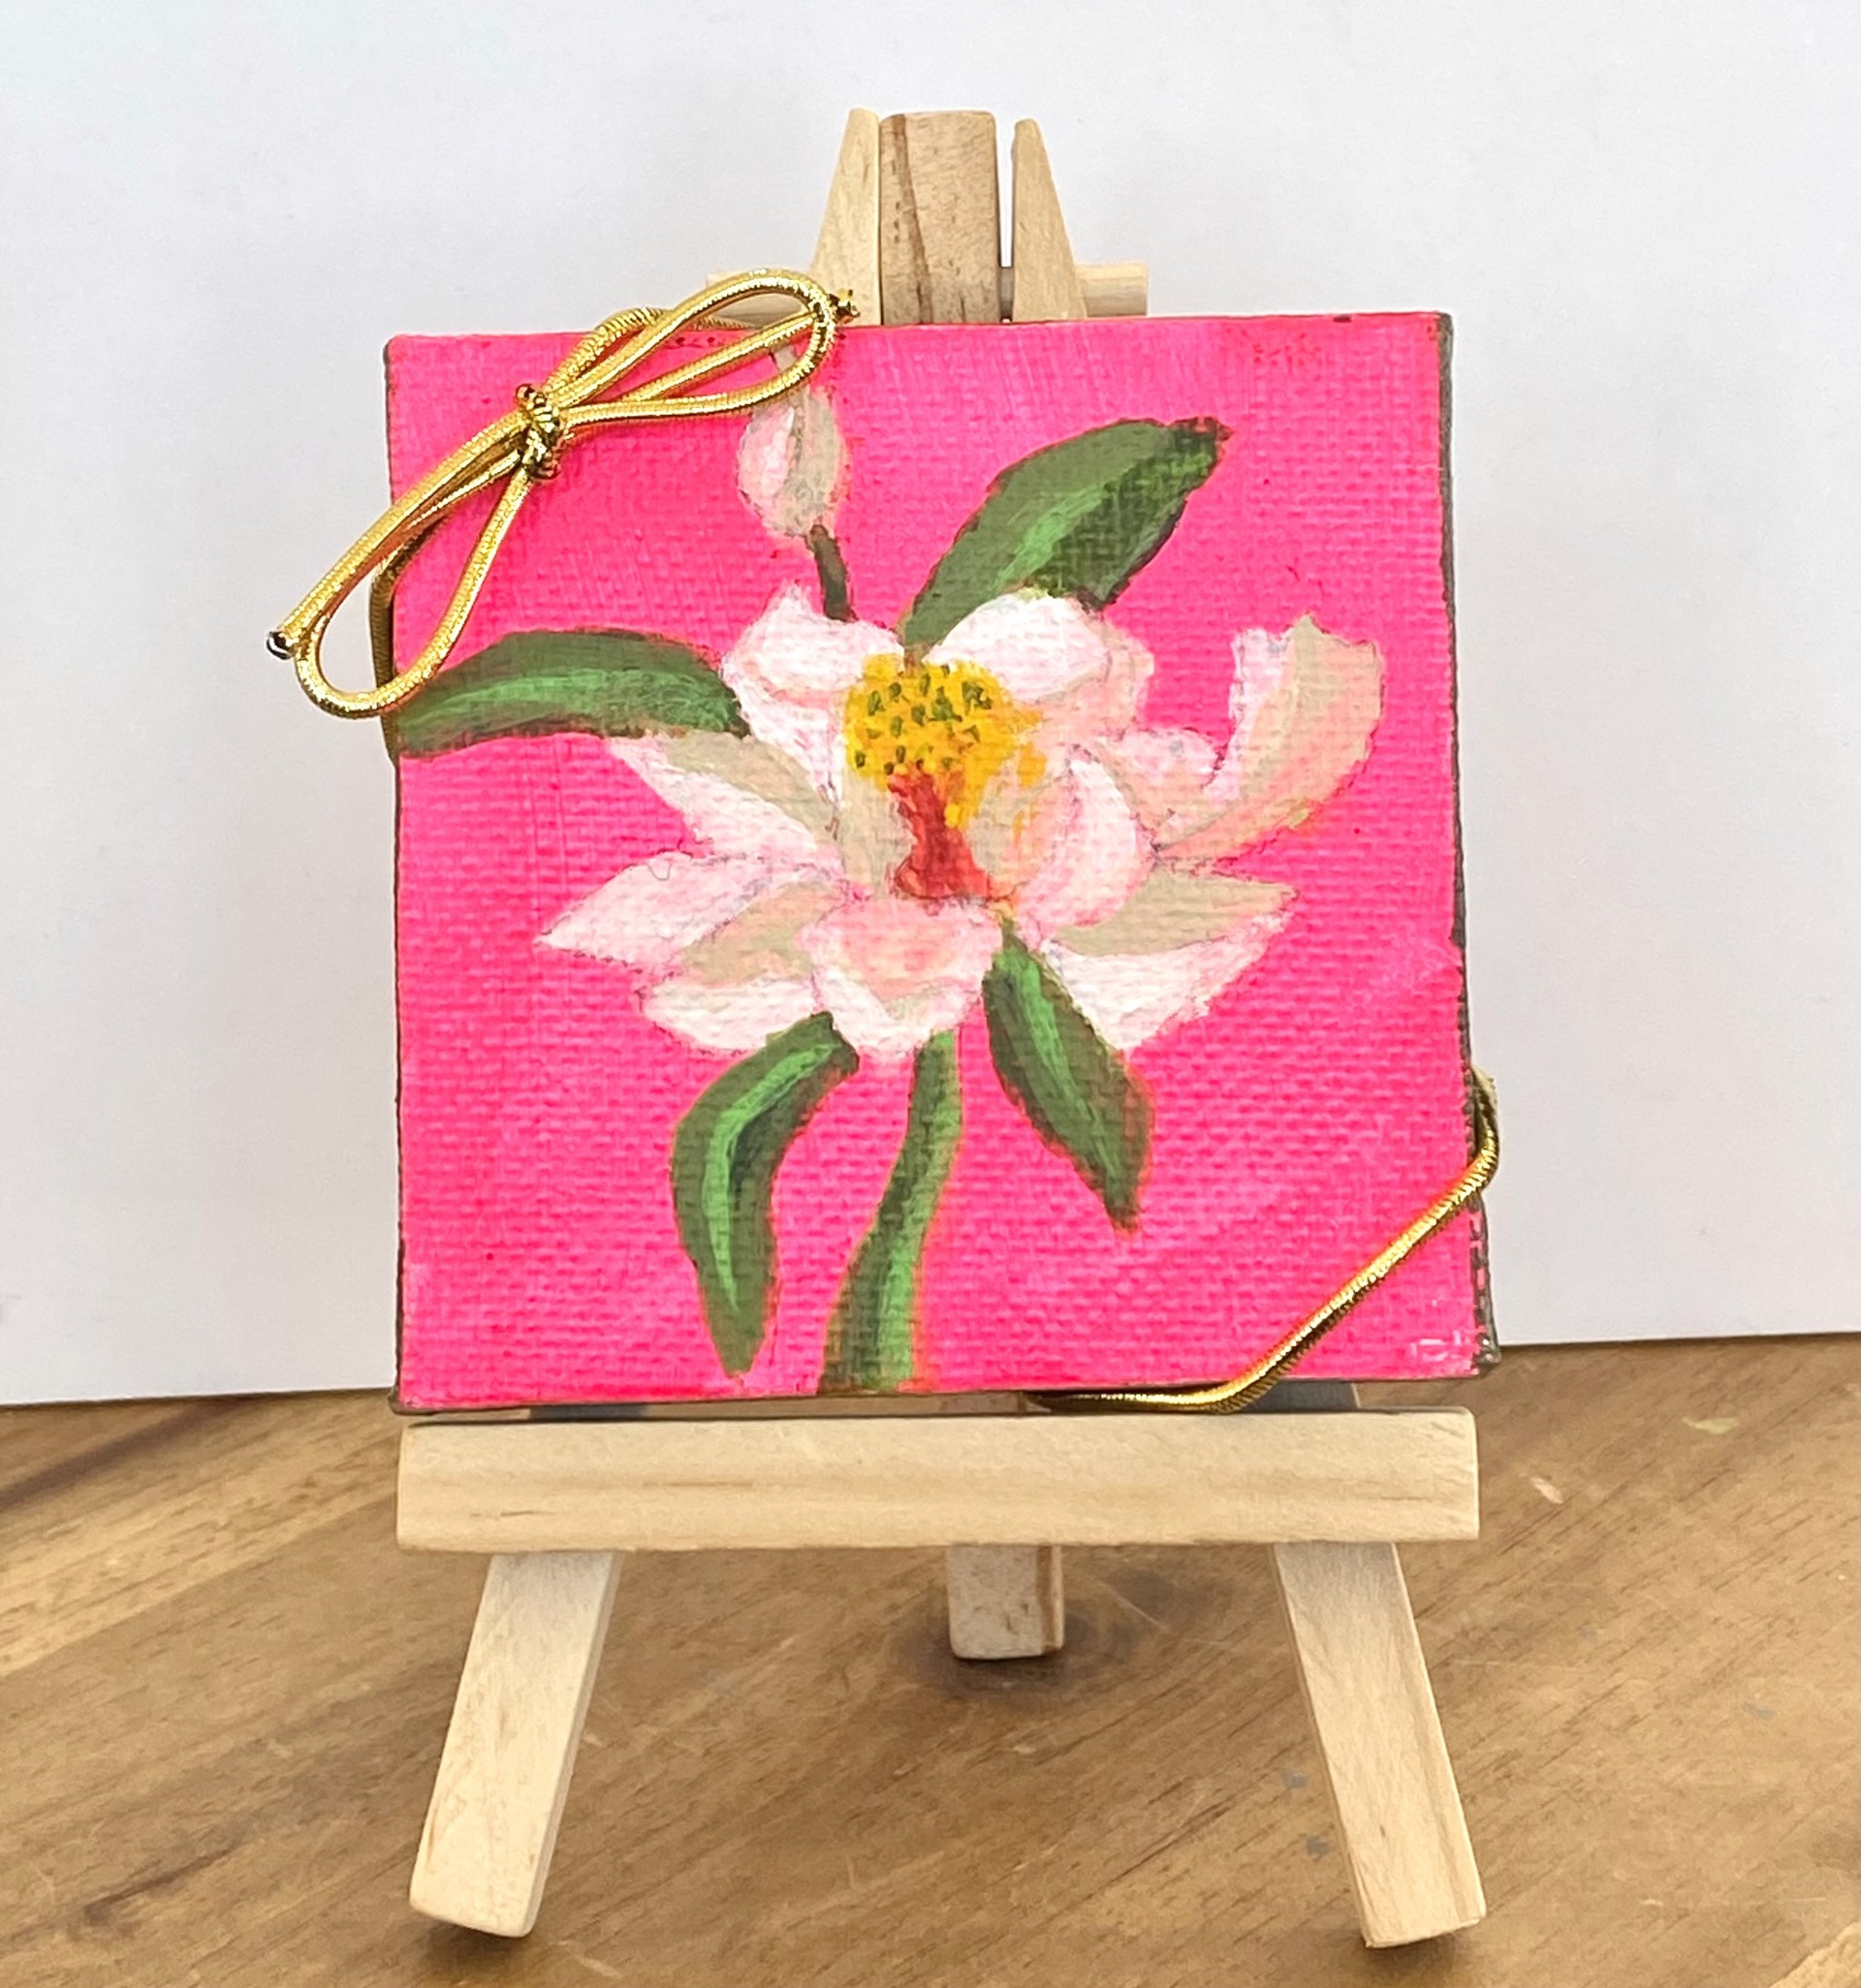 Pink Magnolia Mini Painting #2 by Elke Briuer